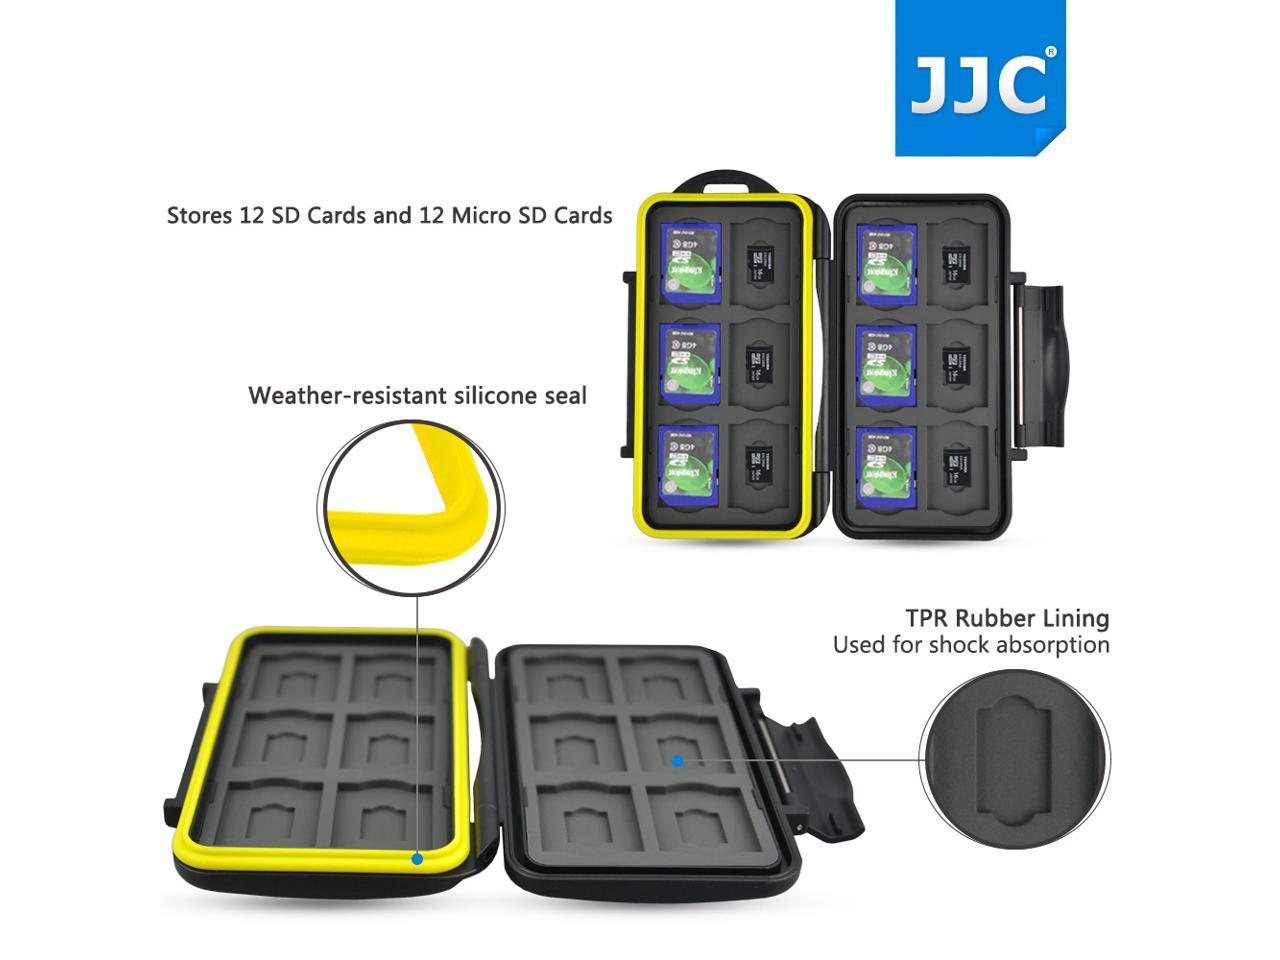 JJC Water-resistant Shockproof SD Card Holder Storage Camera Memory Card Bag Case Protector Cover For 12 SD+12 Micro SD Cards